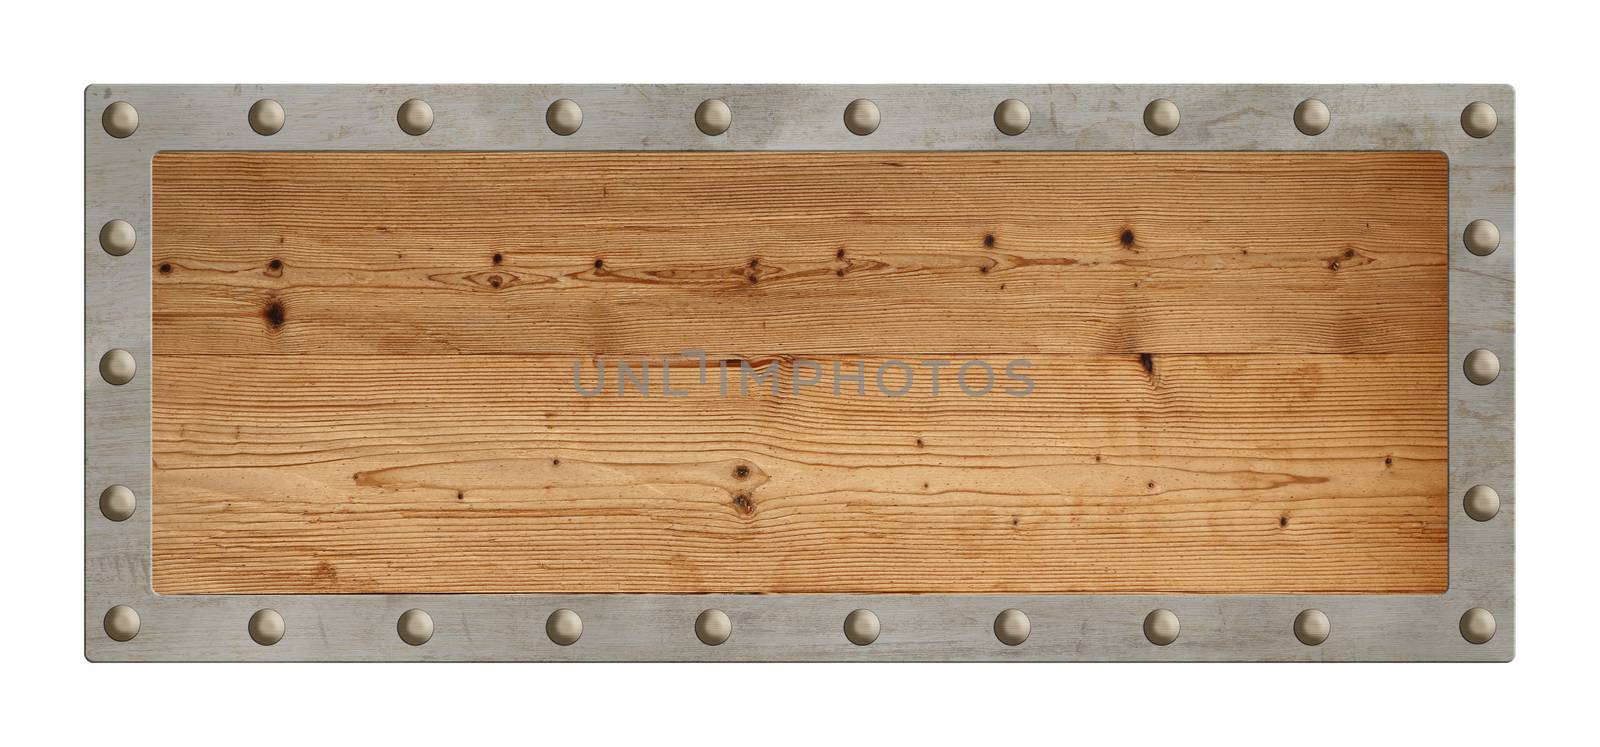 Old blank empty rectangle shape vintage brown wooden sign with metal border and studs isolated on white background